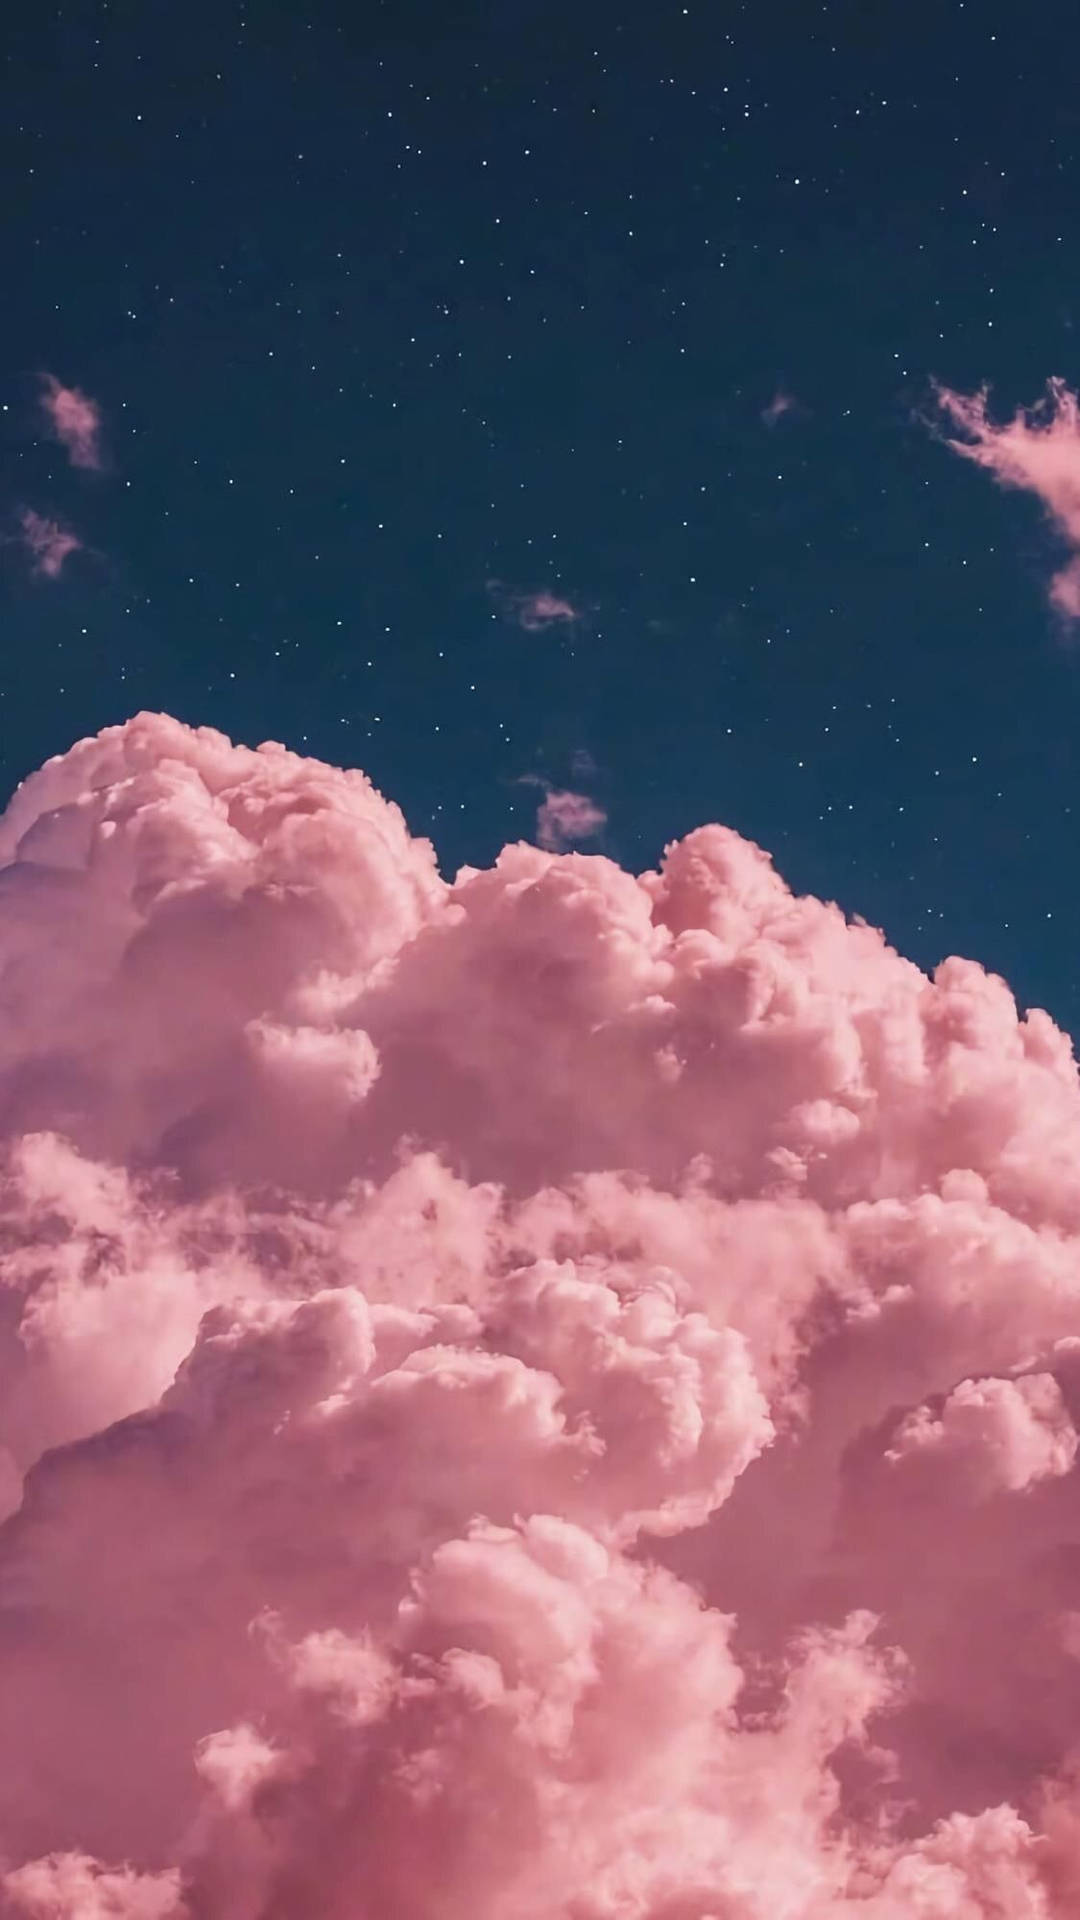 Caption: Majestic Pink Clouds At Dusk Wallpaper